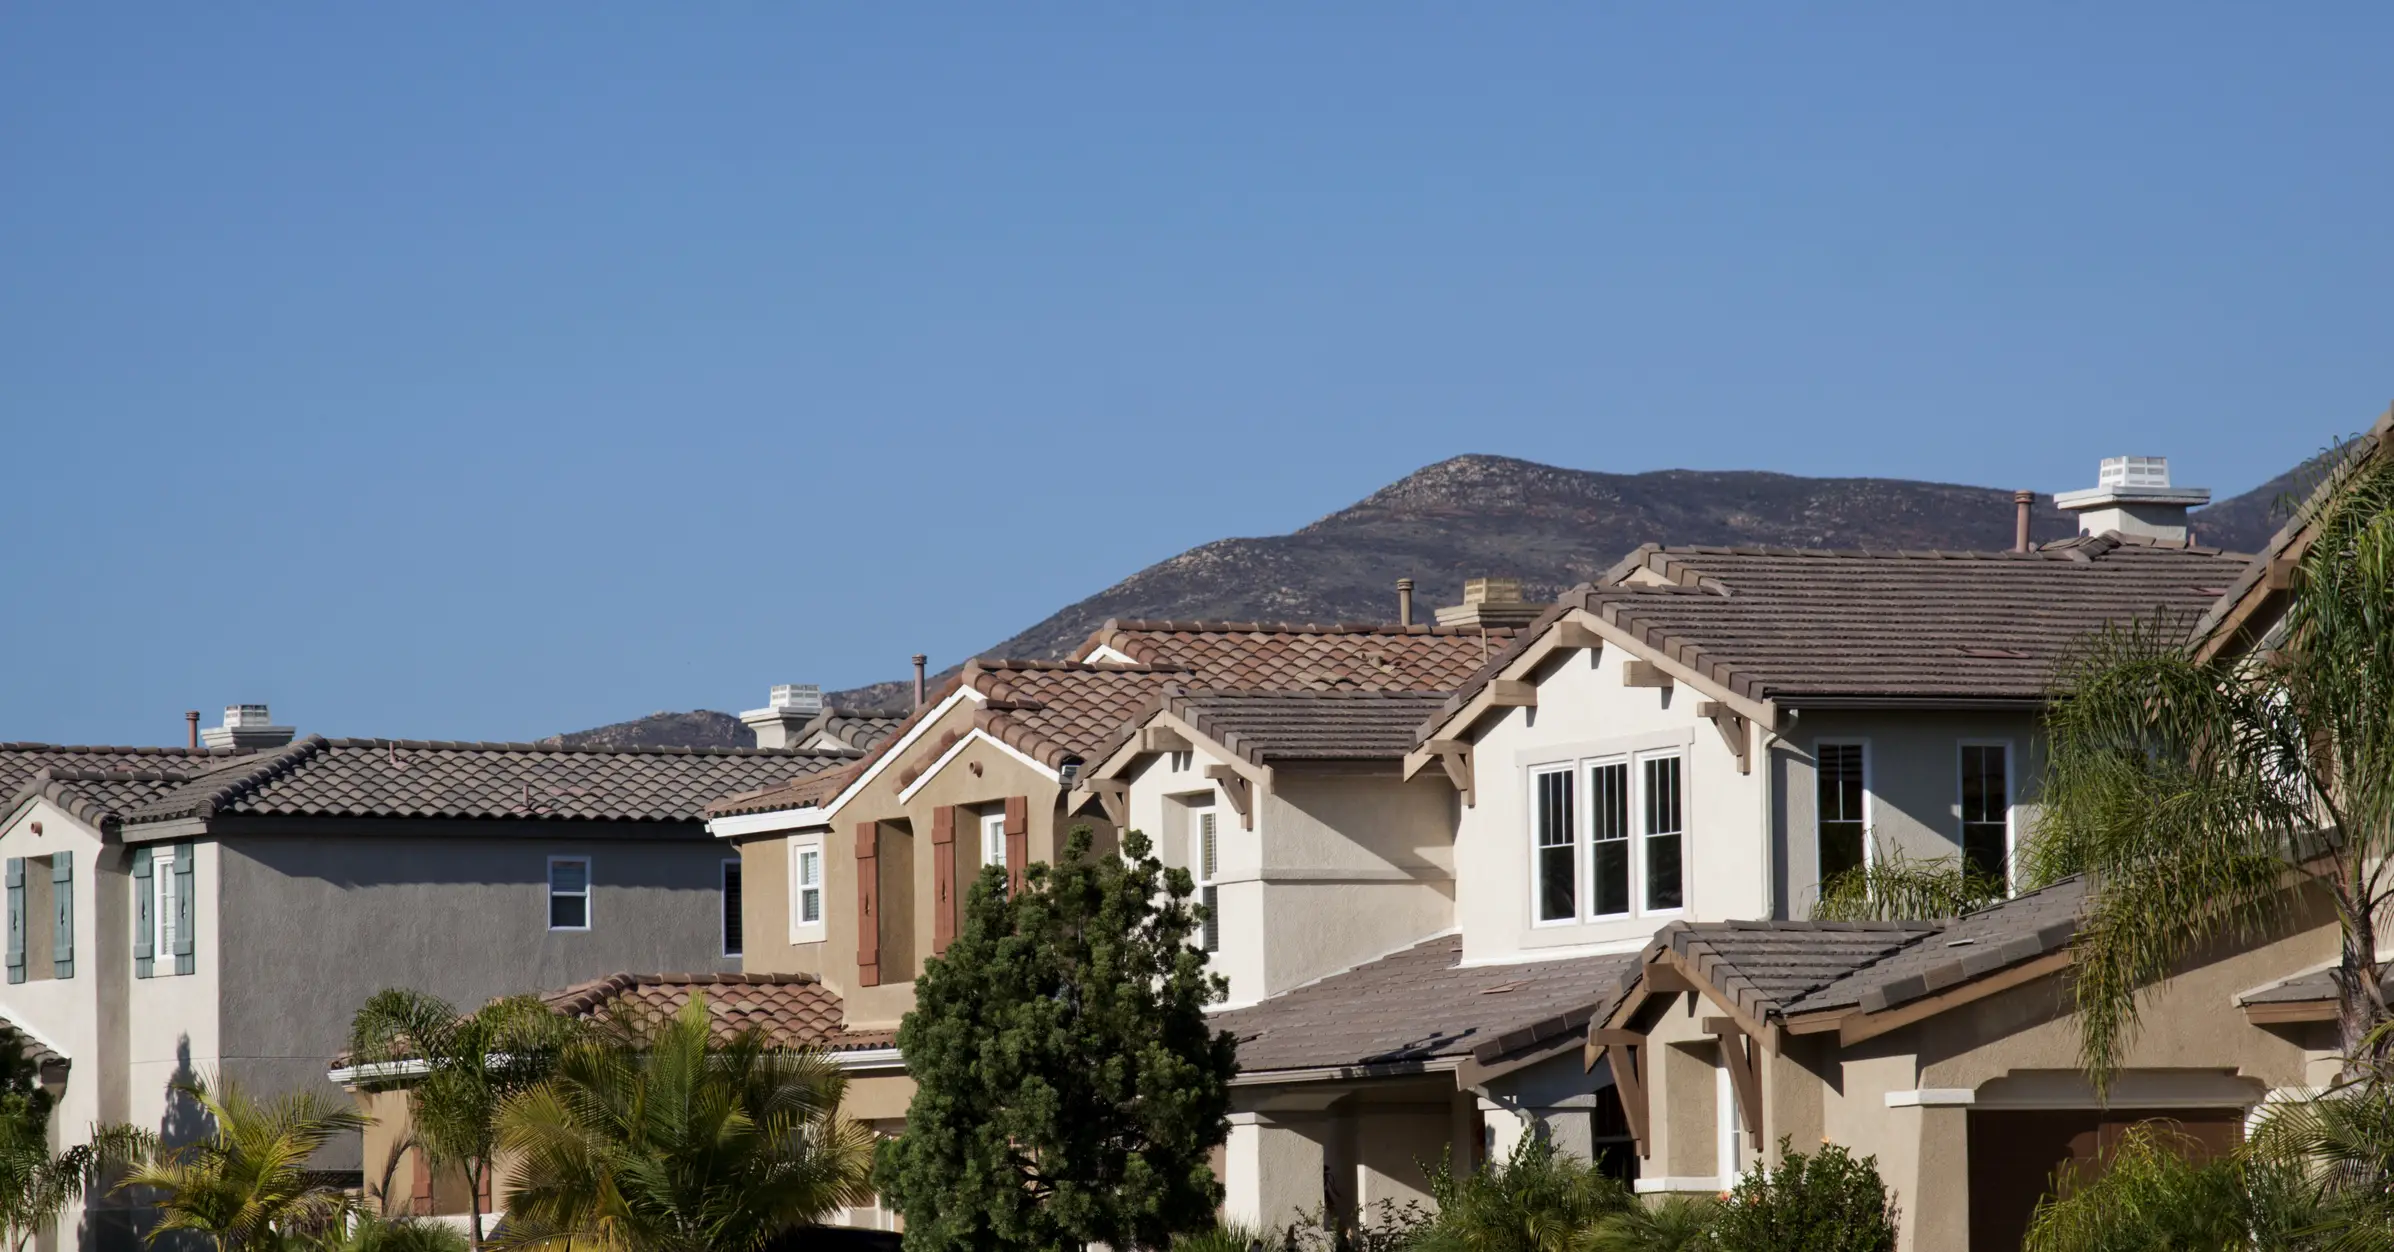 Categories Of Homeowners In California